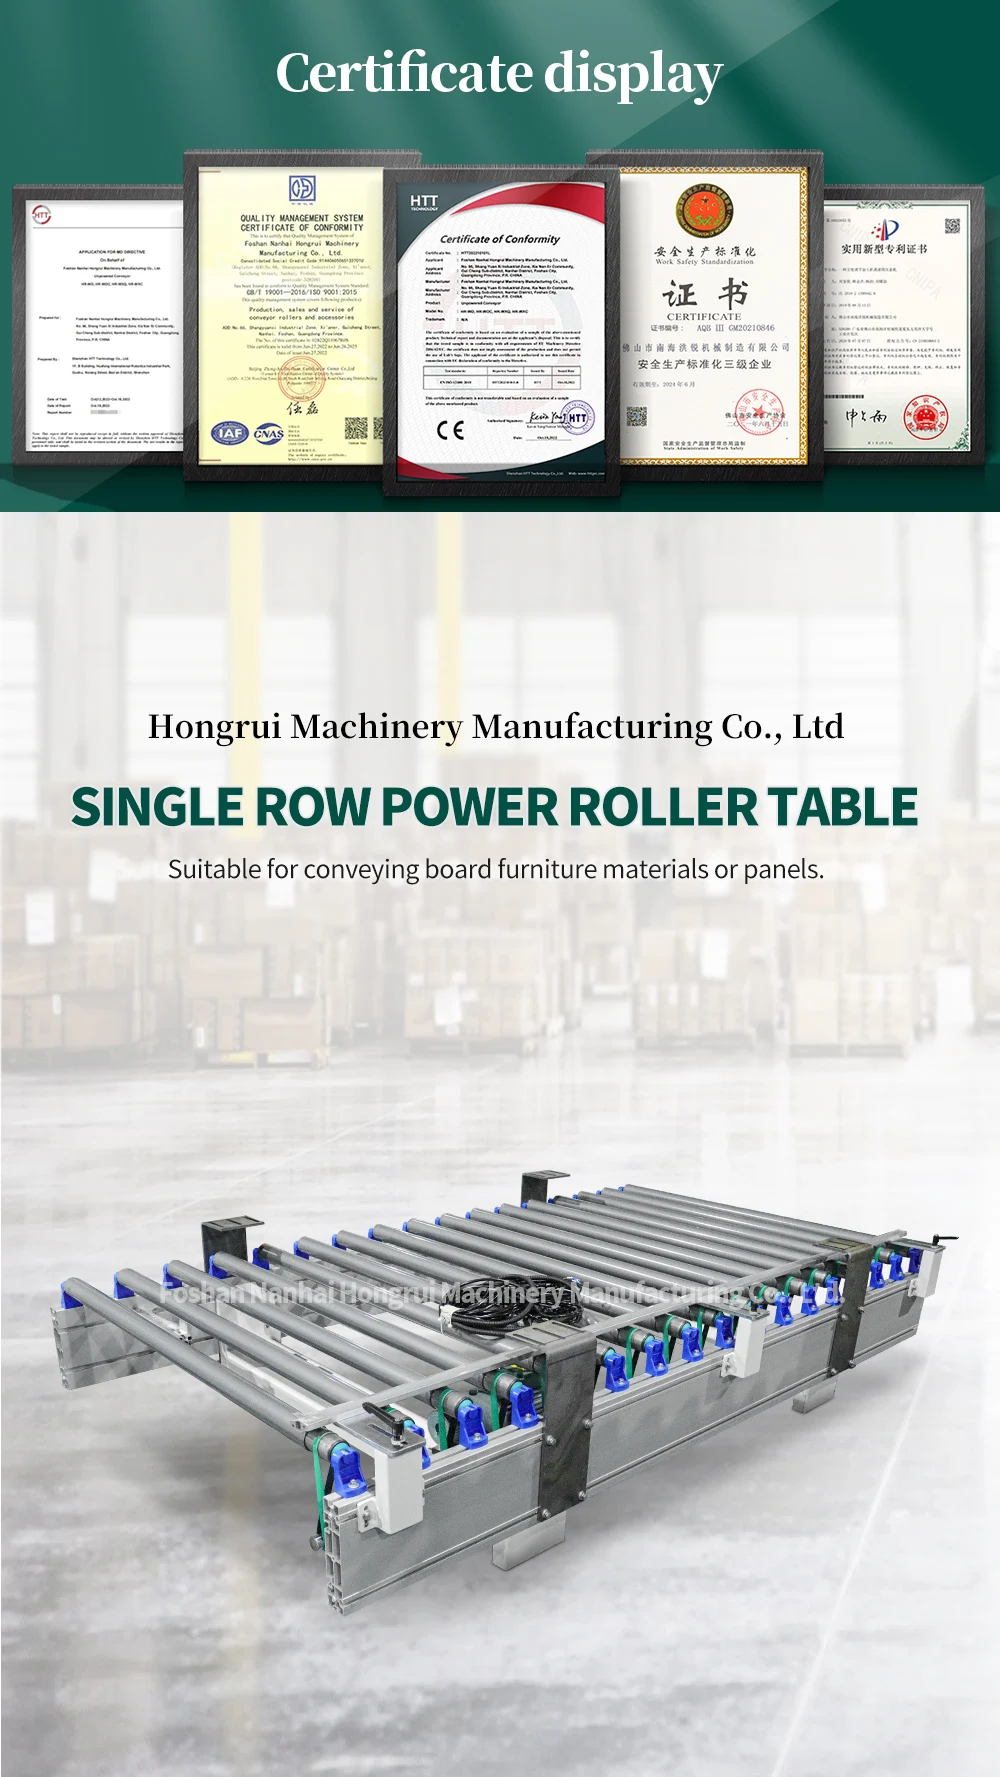 Hongrui is suitable for connecting edge banding machines and can customize a single row power straight roller table factory